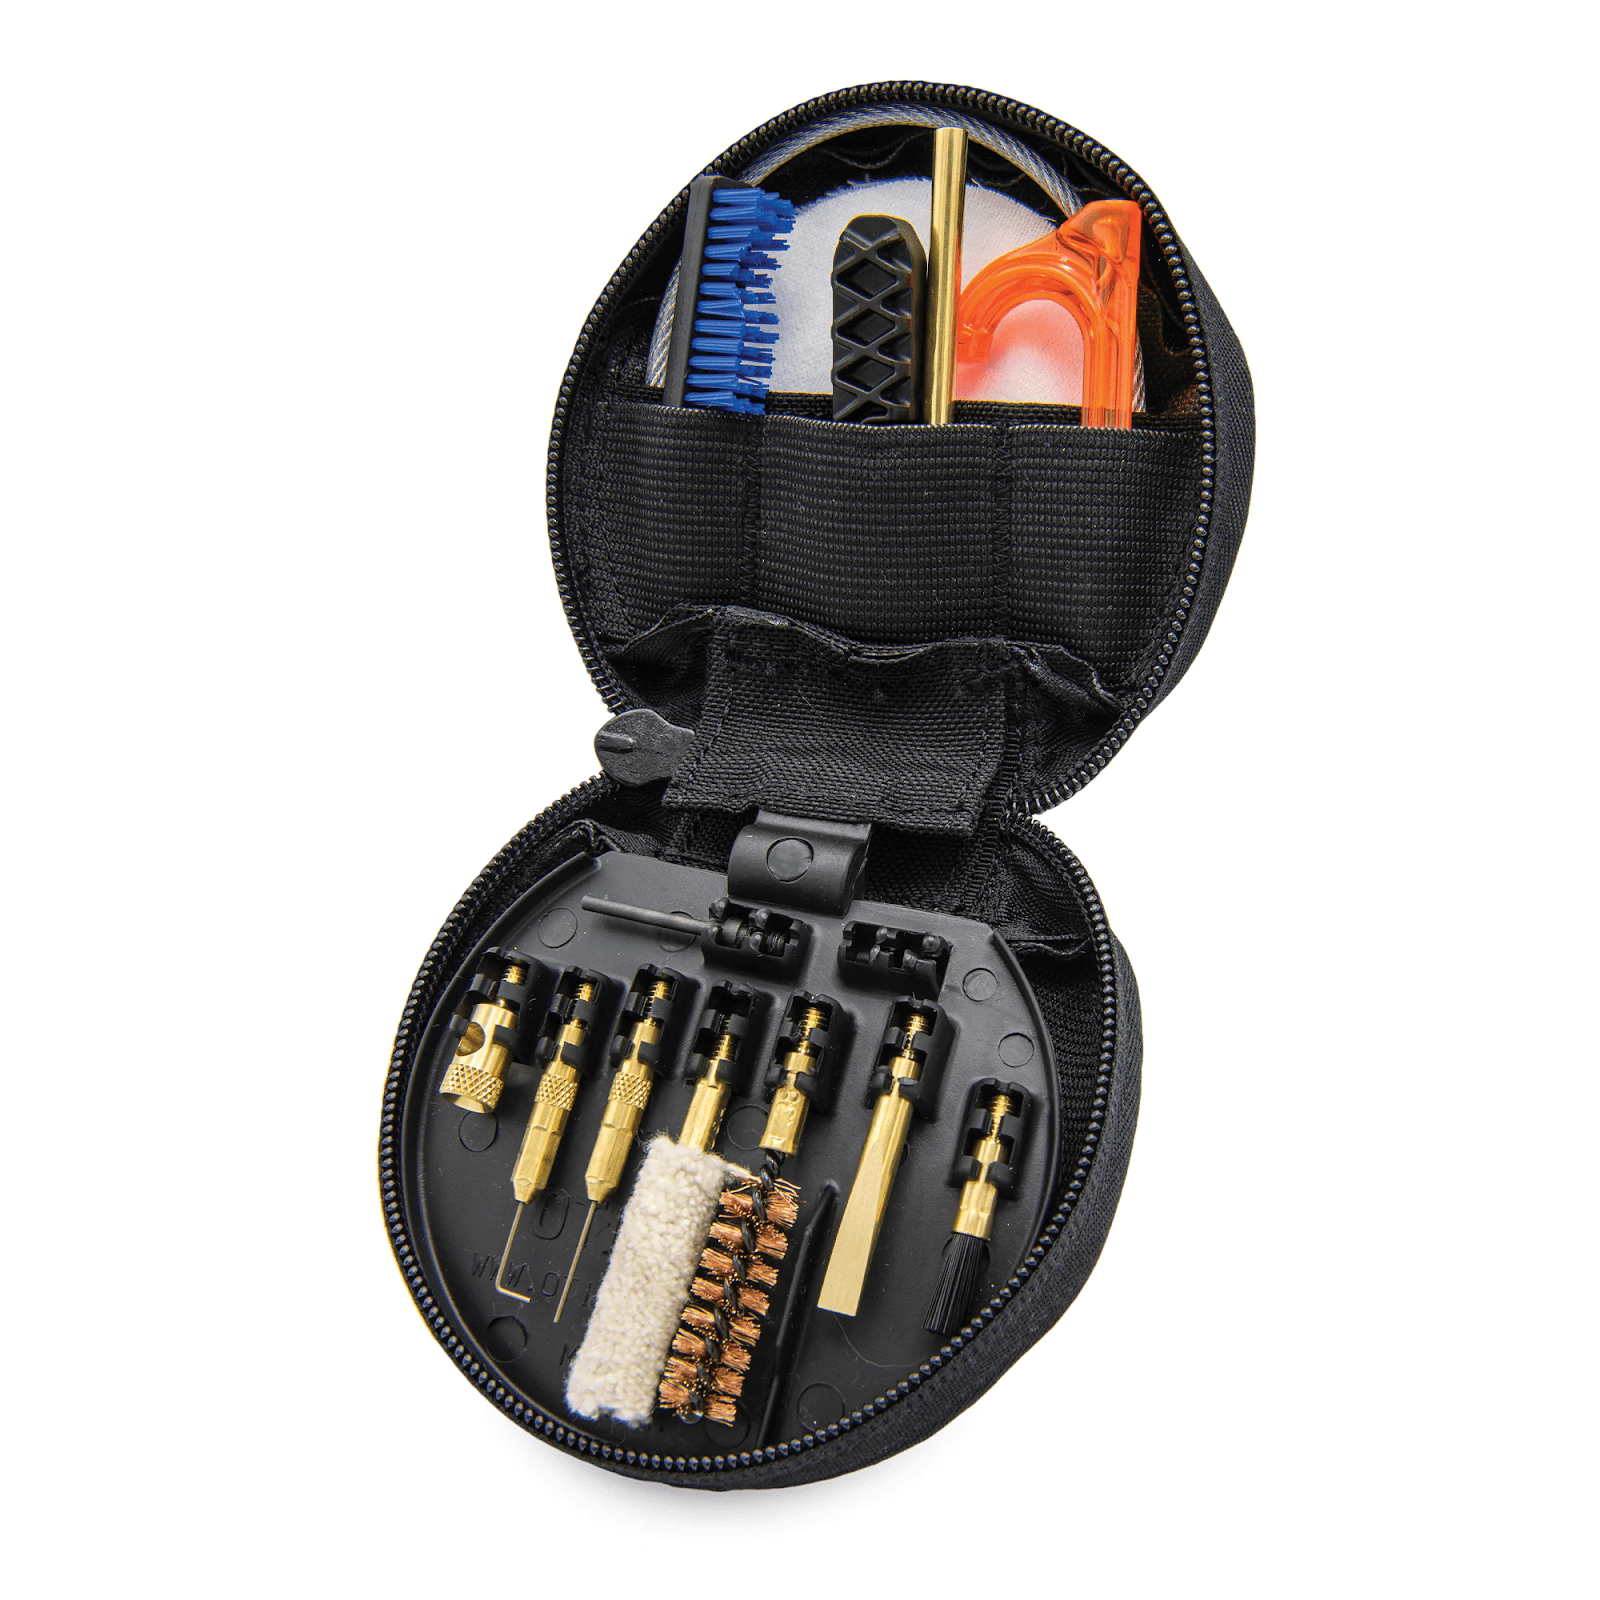 Best 9mm Cleaning Kits